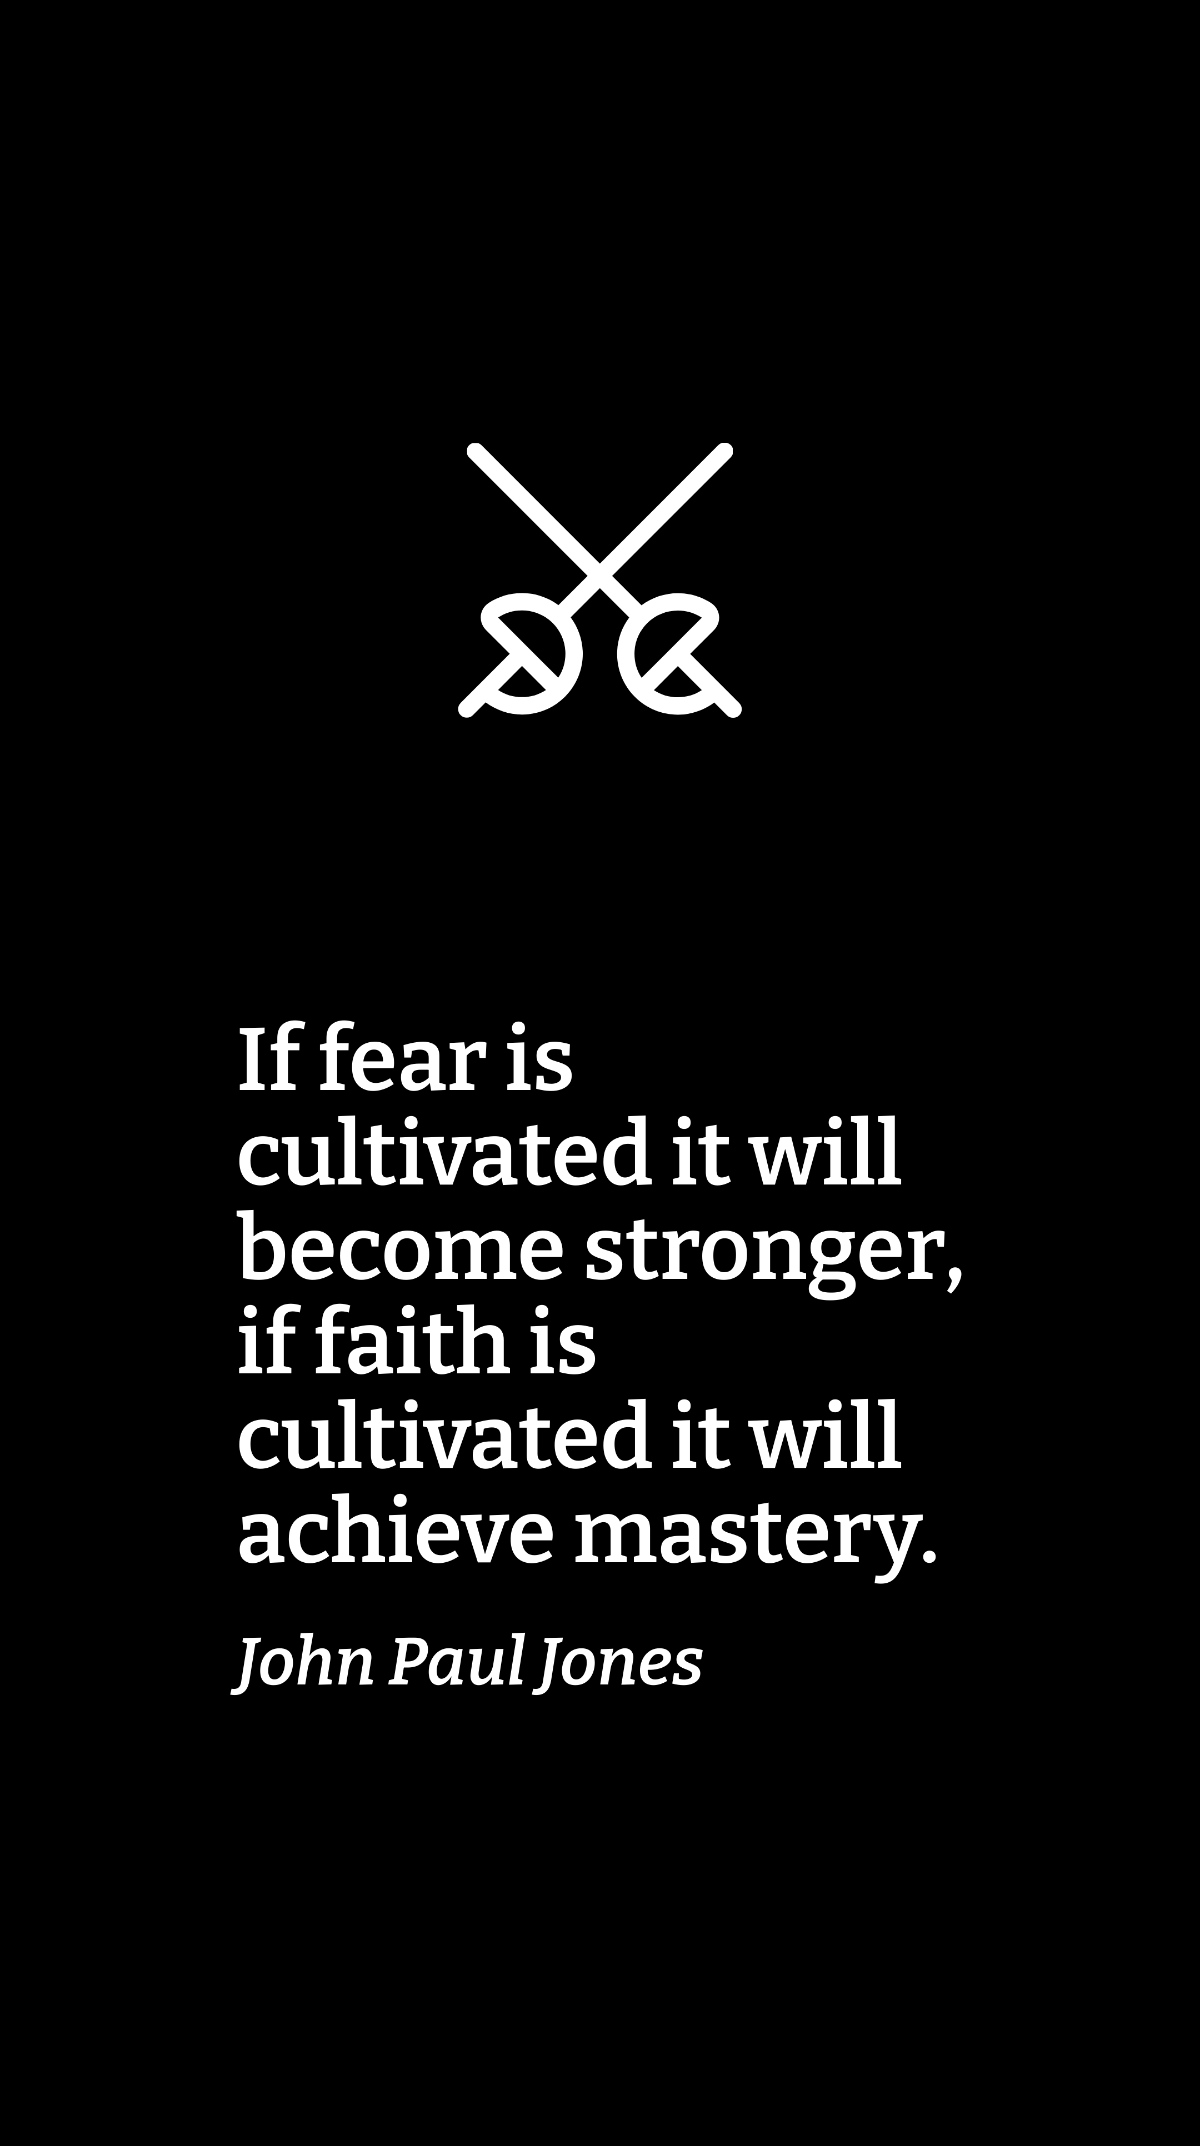 Free John Paul Jones - If fear is cultivated it will become stronger, if faith is cultivated it will achieve mastery. Template